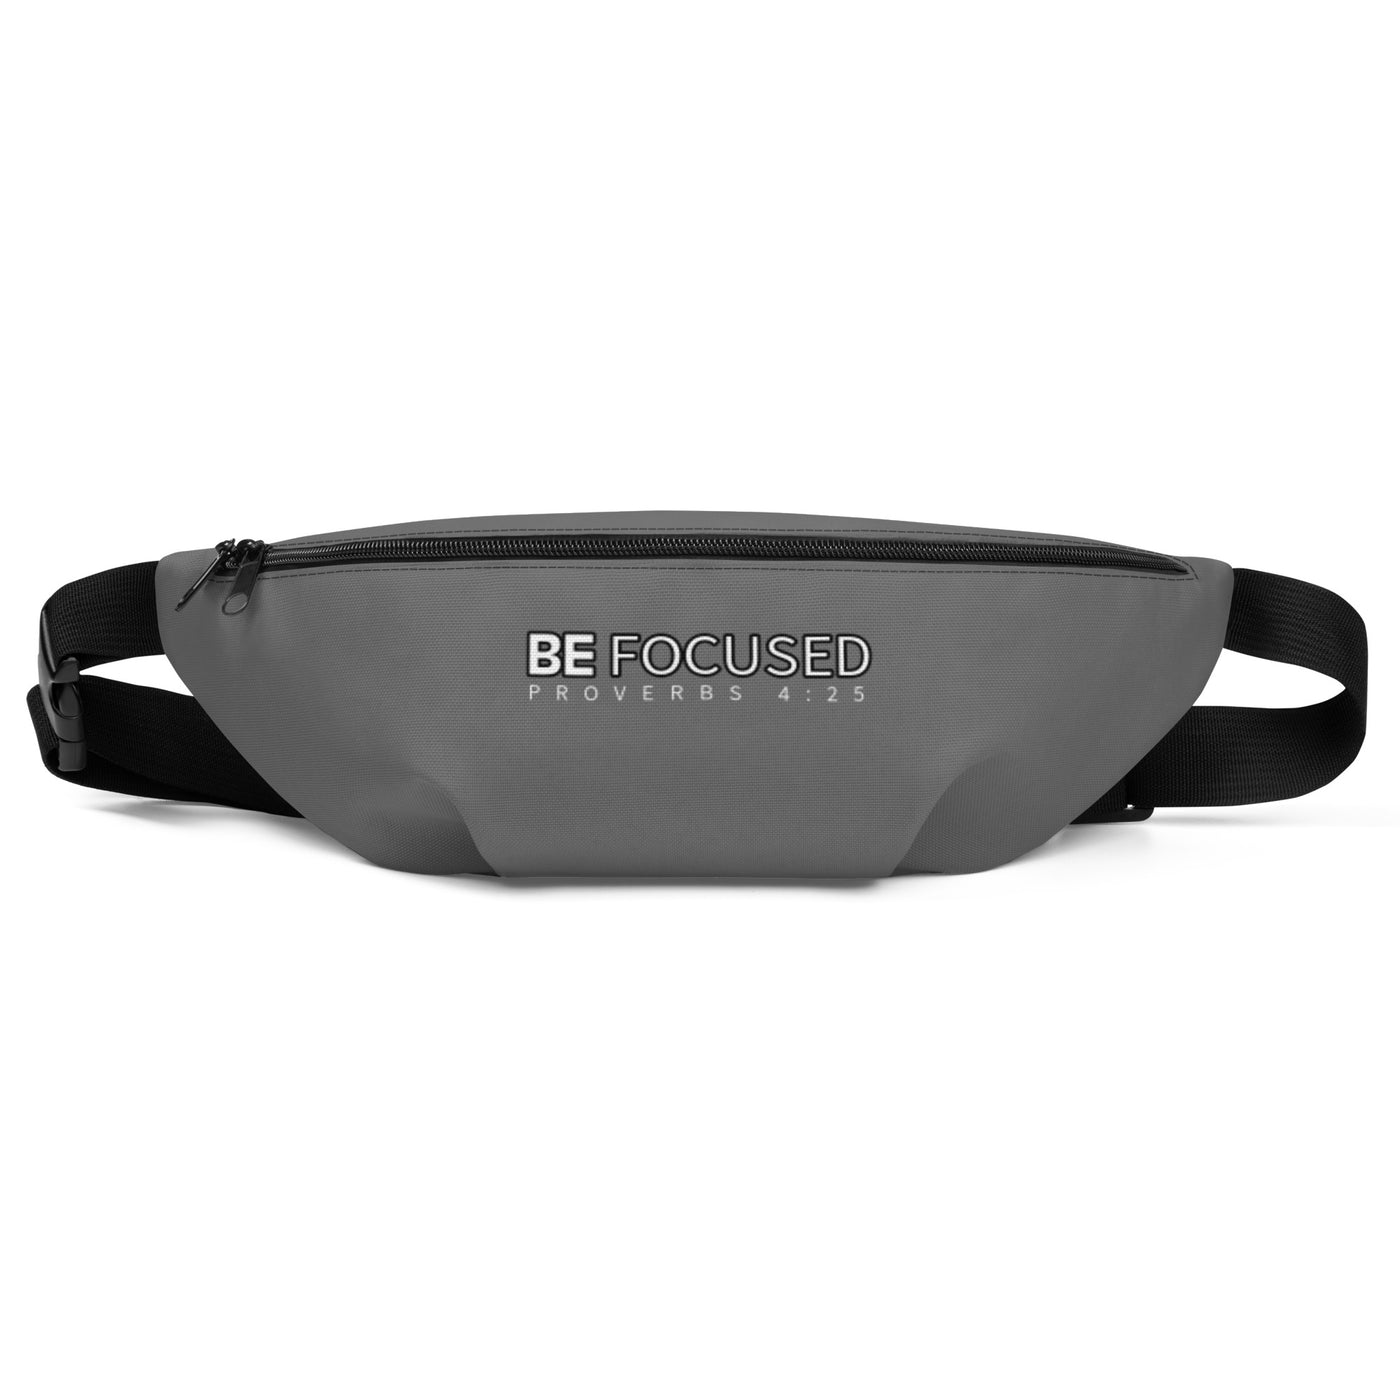 Gray Fanny Pack - Be Focused Proverbs 4:25